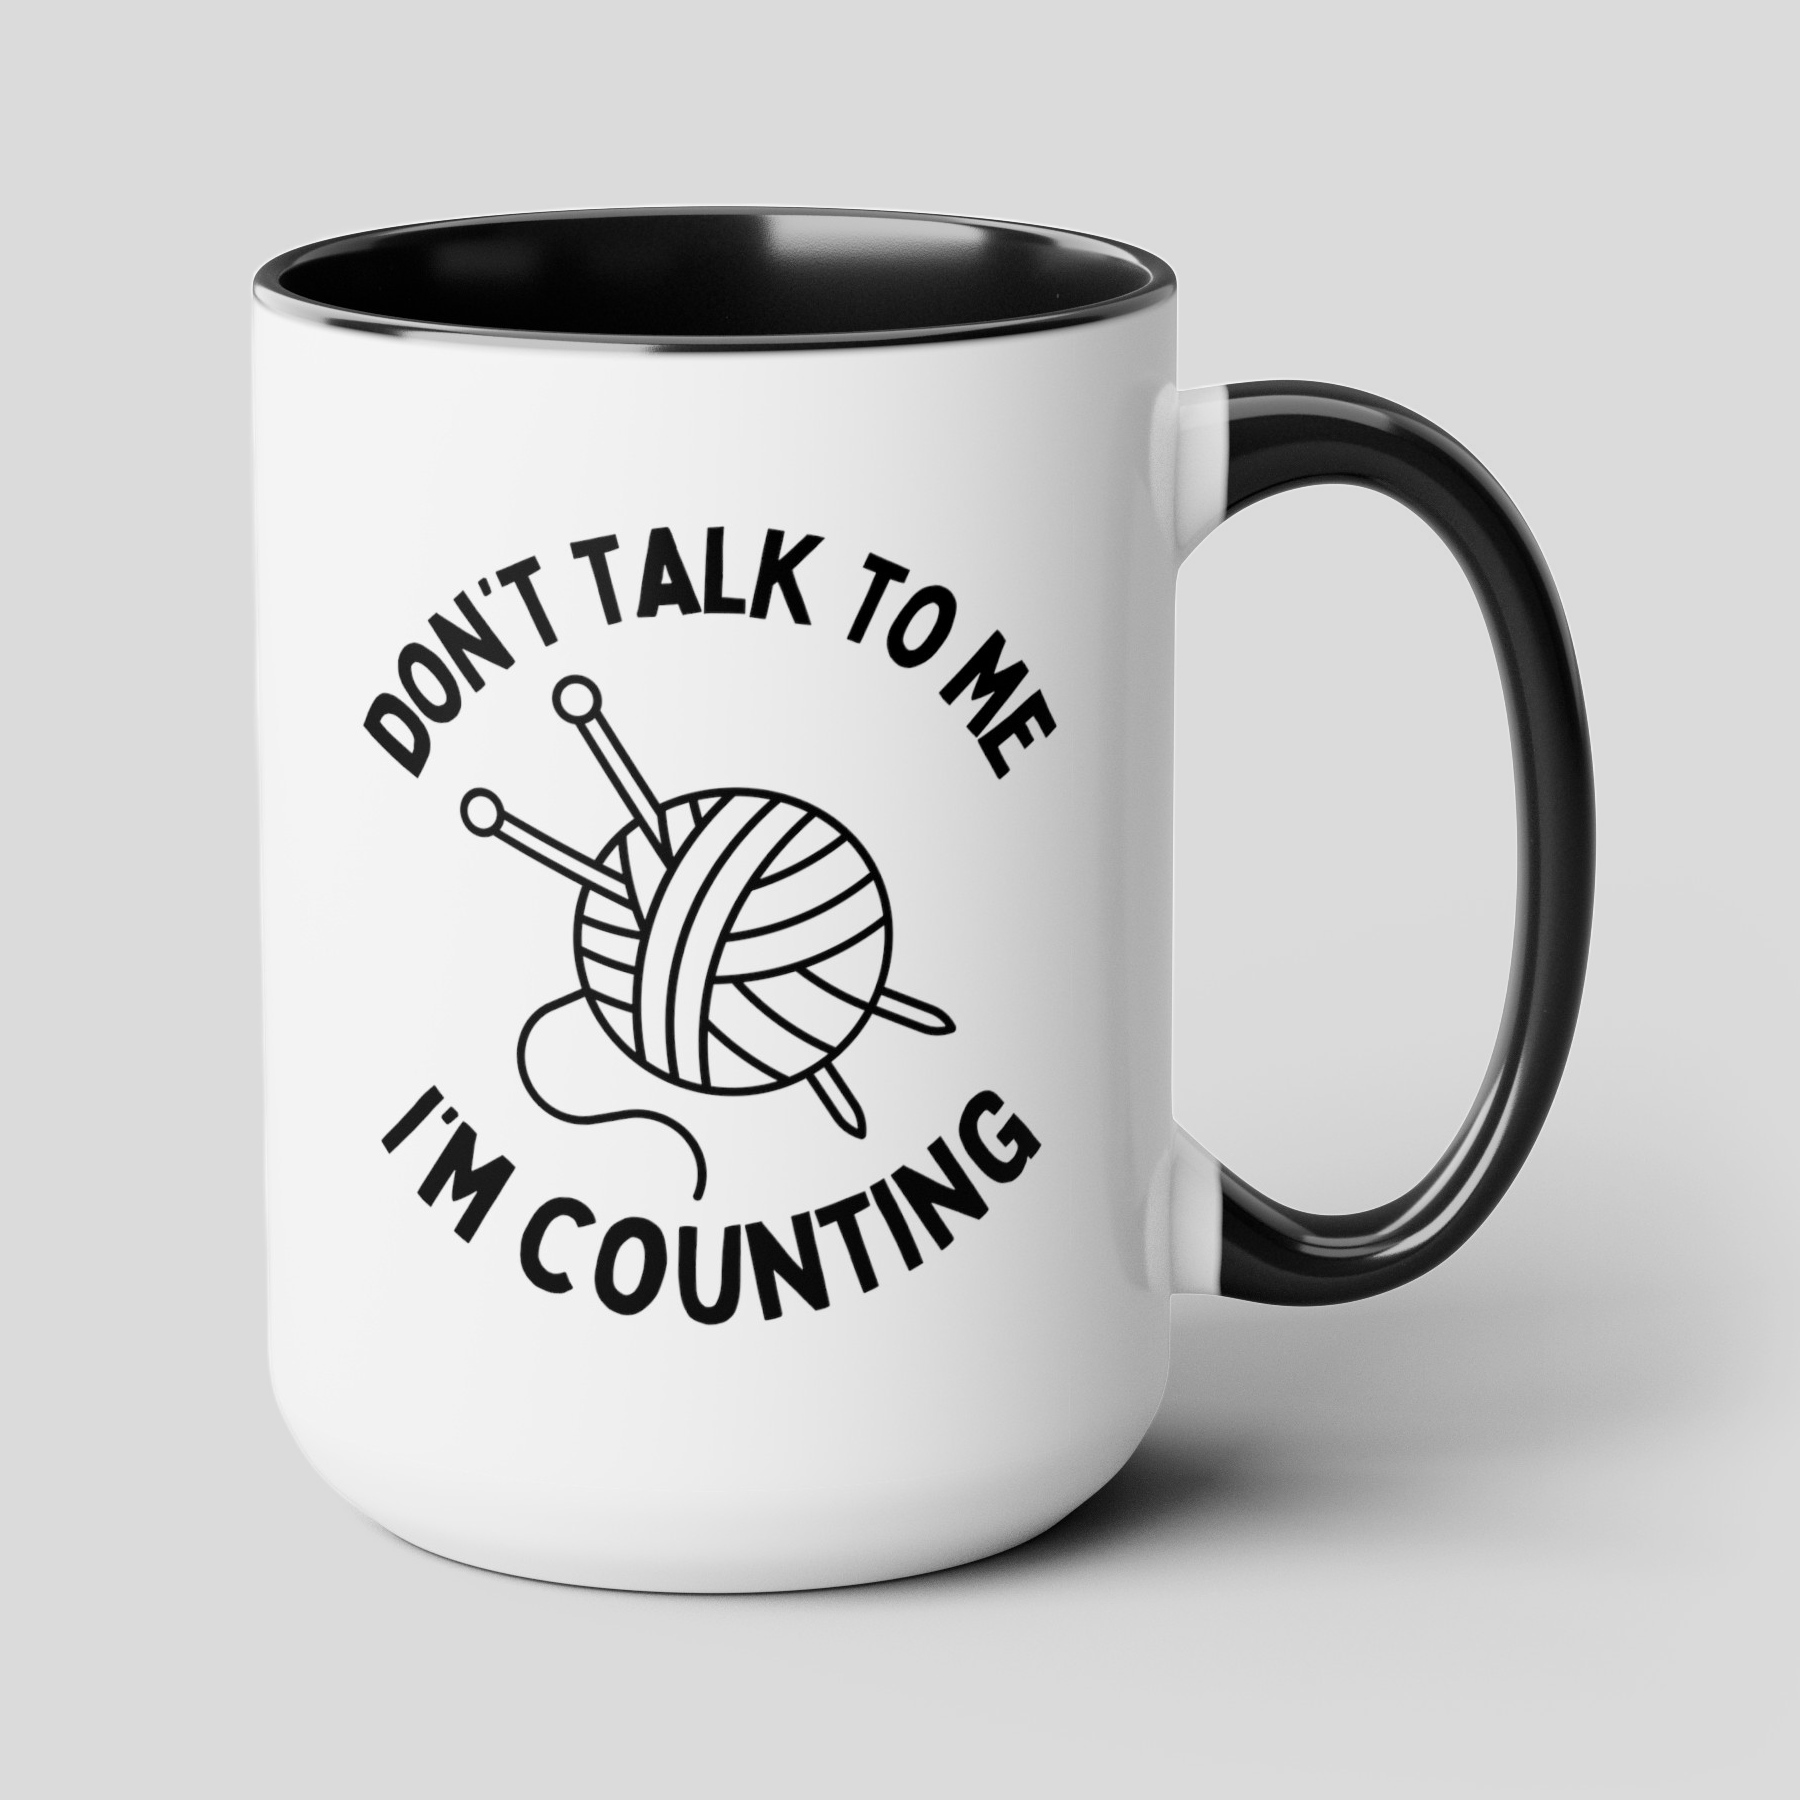 Don't Talk To Me I'm Counting 15oz white with black accent funny large coffee mug gift for knitter knitting crochet crocheter knit hobby waveywares wavey wares wavywares wavy wares cover